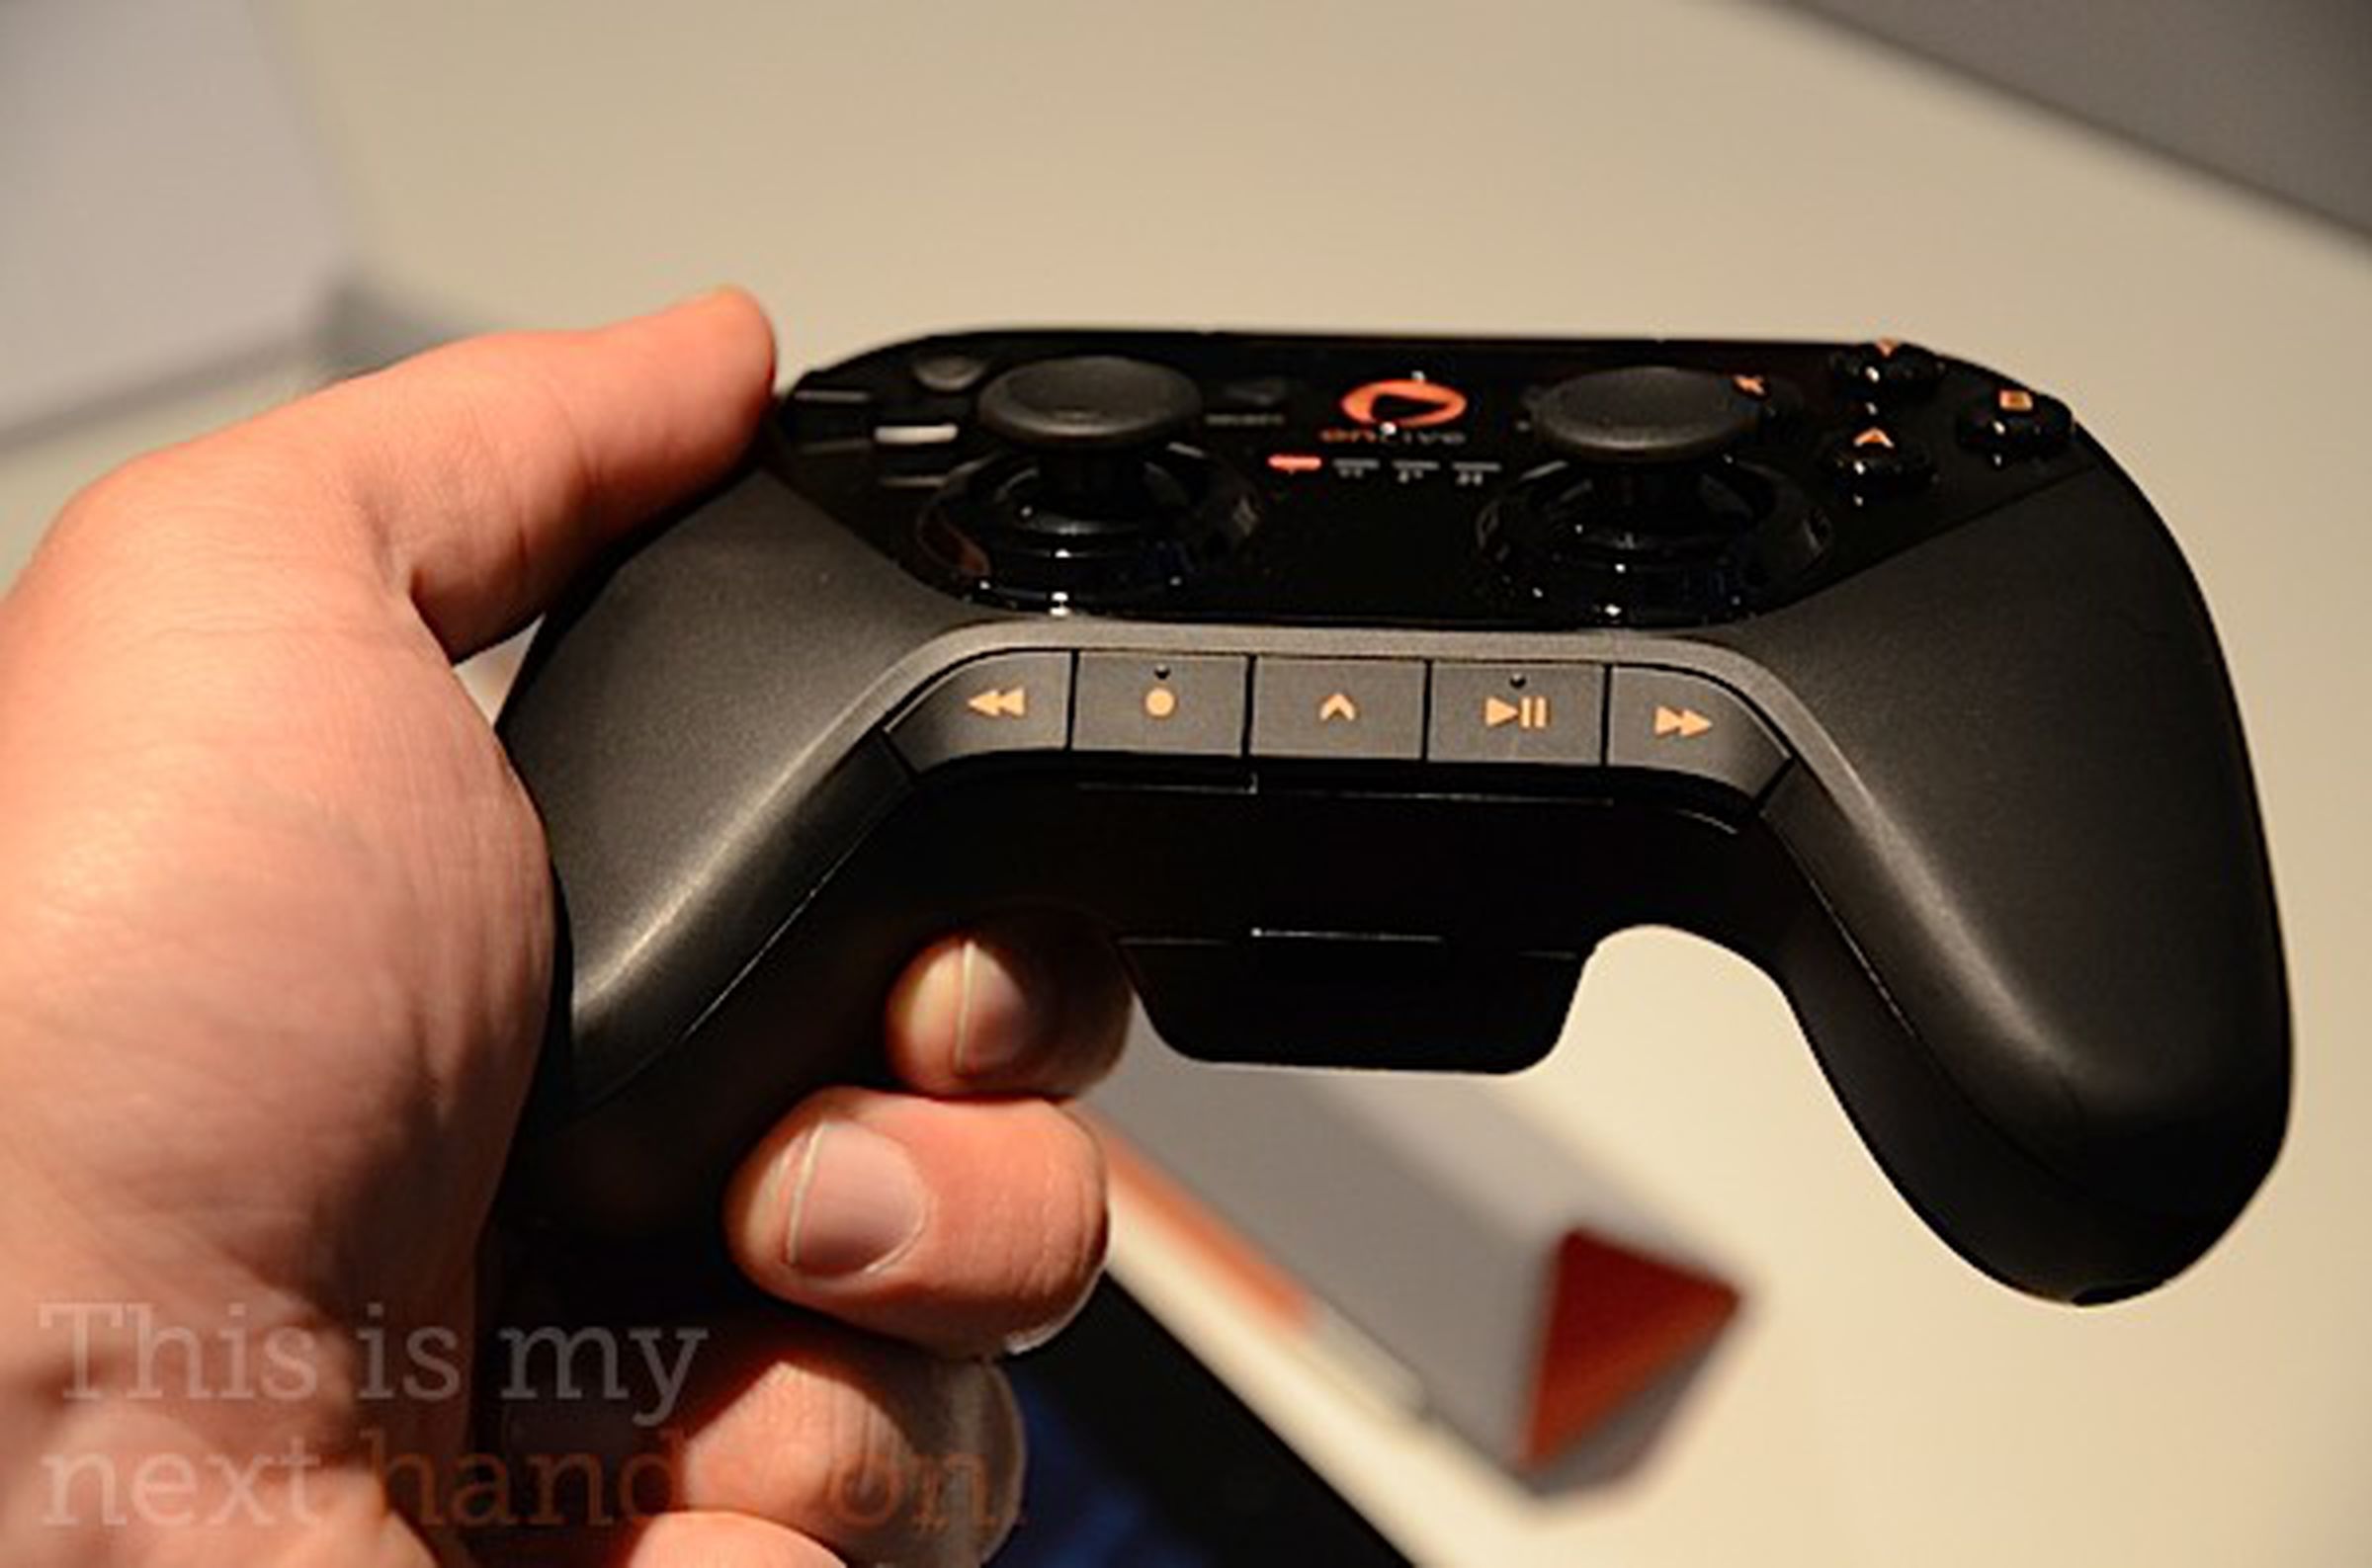 OnLive running on the on Motorola Xoom and HTC Flyer